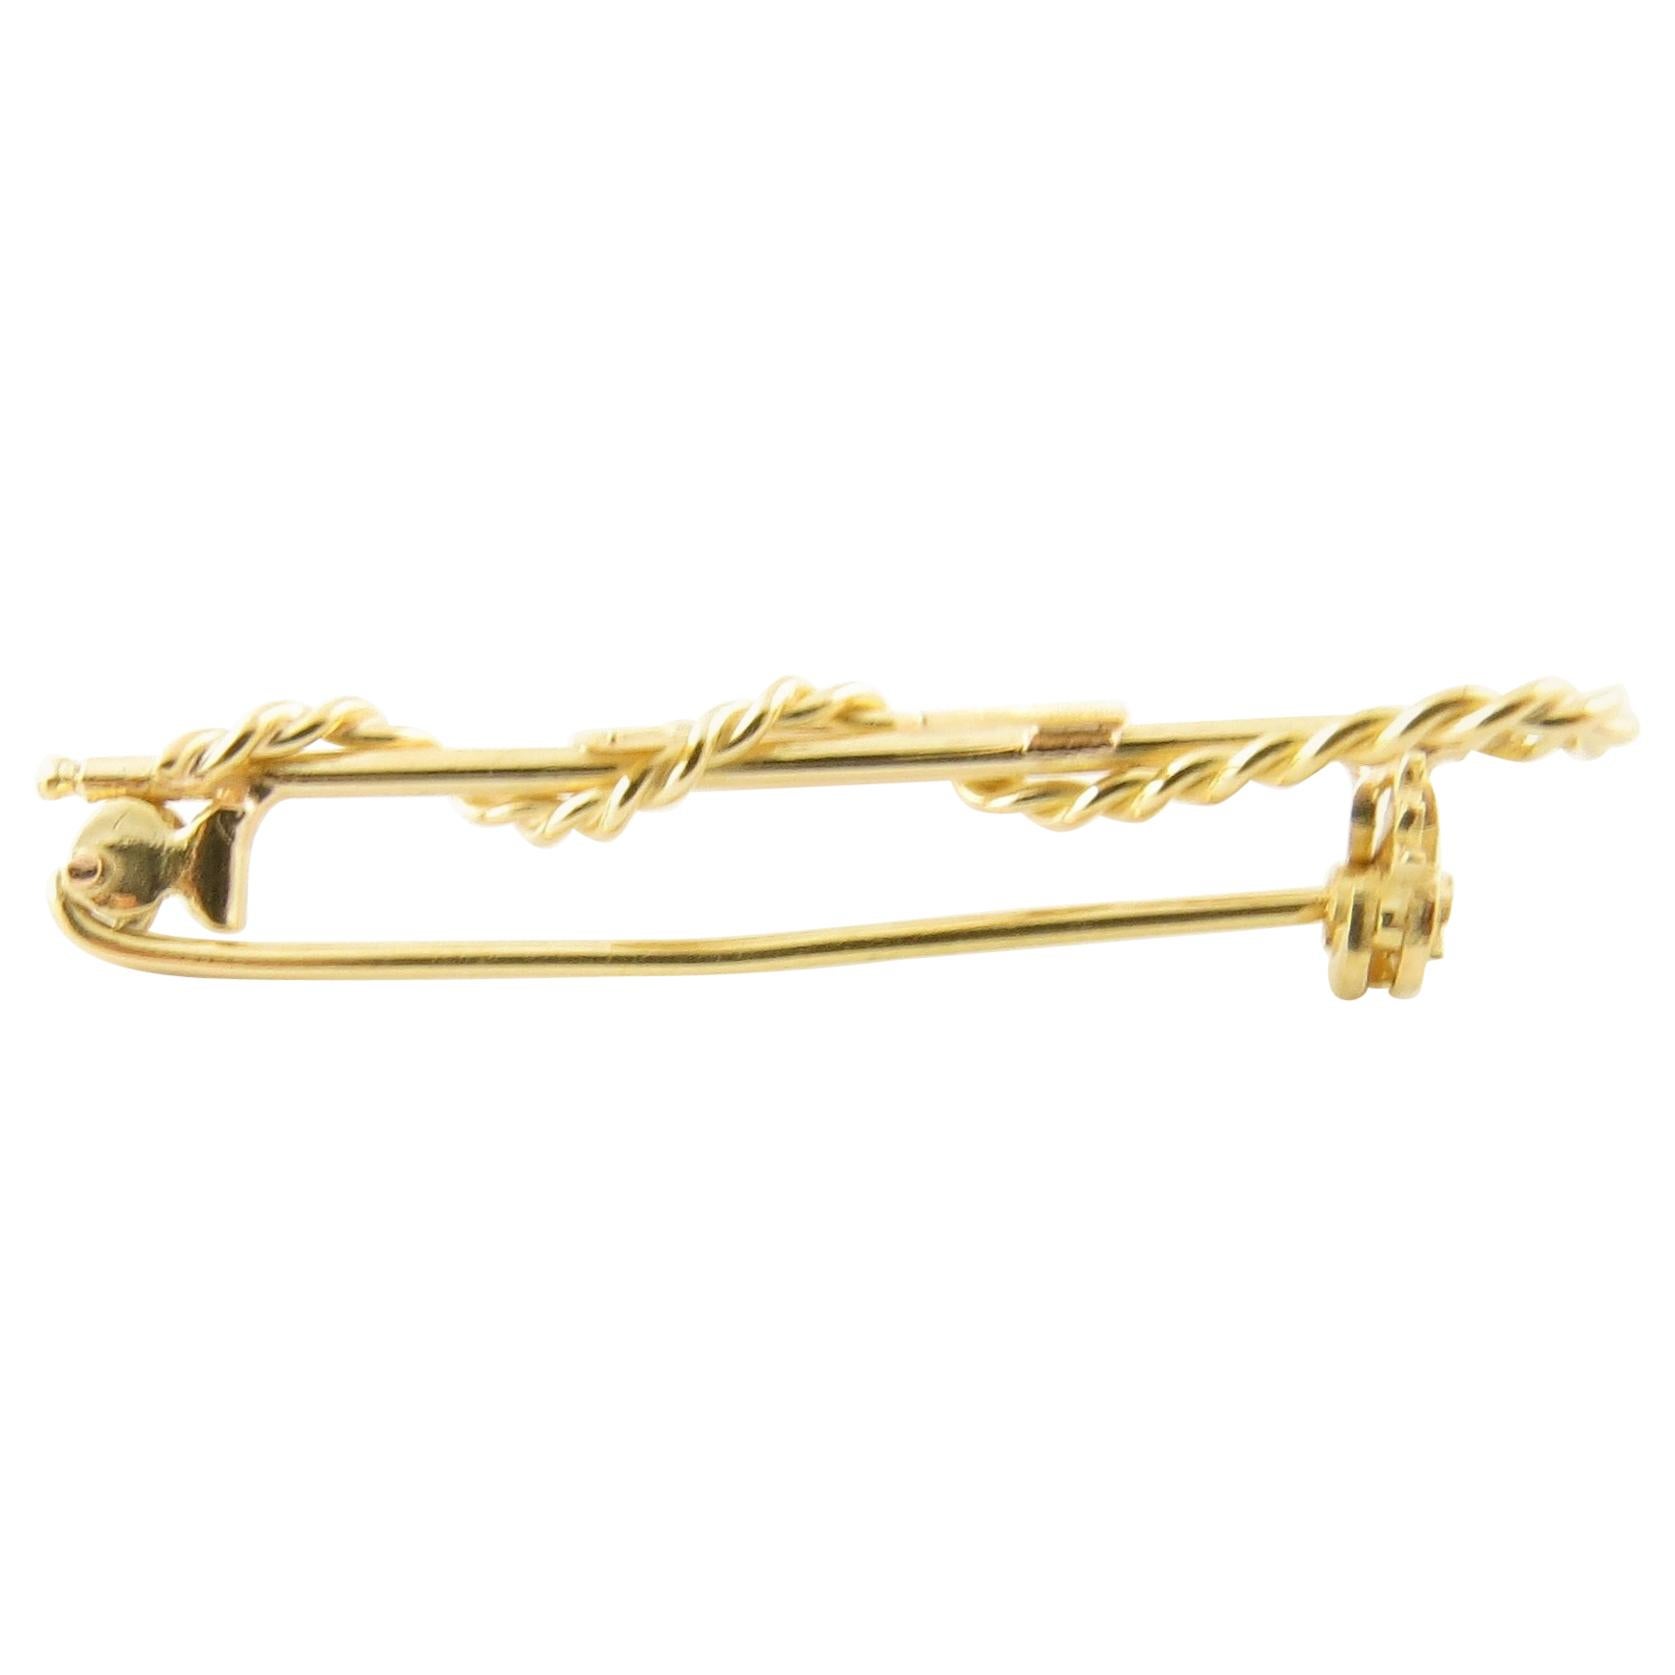 Vintage 18 Karat Yellow Gold Horseshoe and Riding Crop Brooch/Pin-
 Perfect gift for the equestrian in your life! 
This lovely brooch features a horseshoe and riding crop meticulously detailed in 18K yellow gold. 
Size: 32 mm x 16 mm 
Weight: 1.5